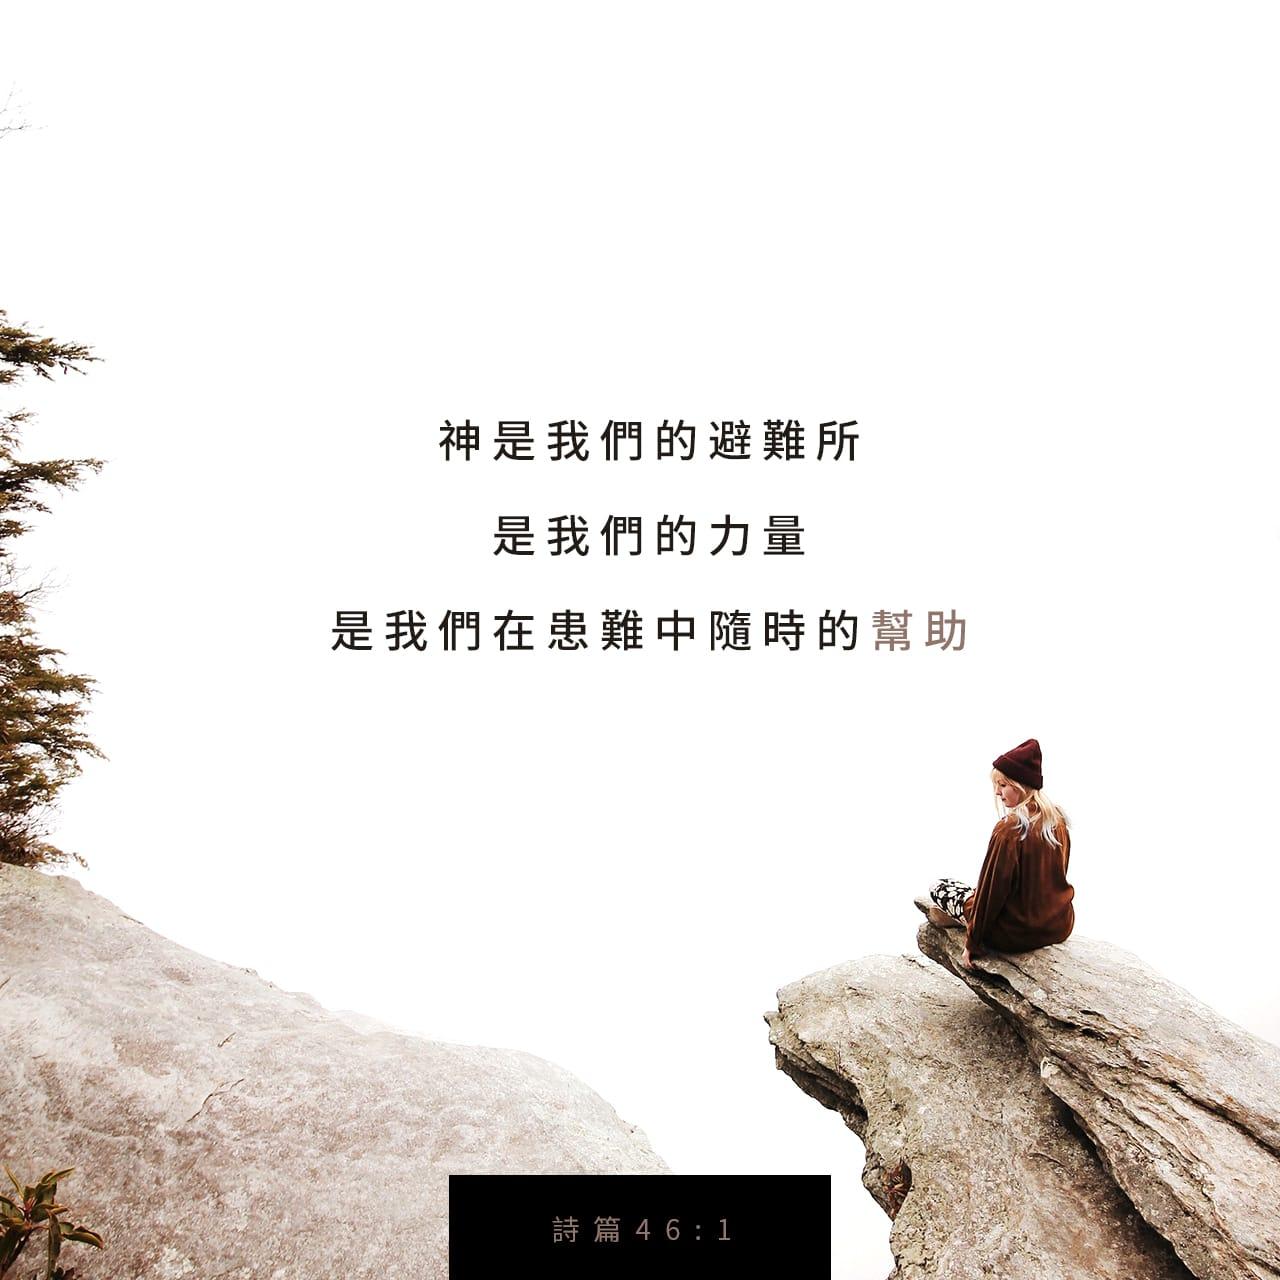 Bible Verse of the Day - day 154 - image 37739 (诗篇 46:1)